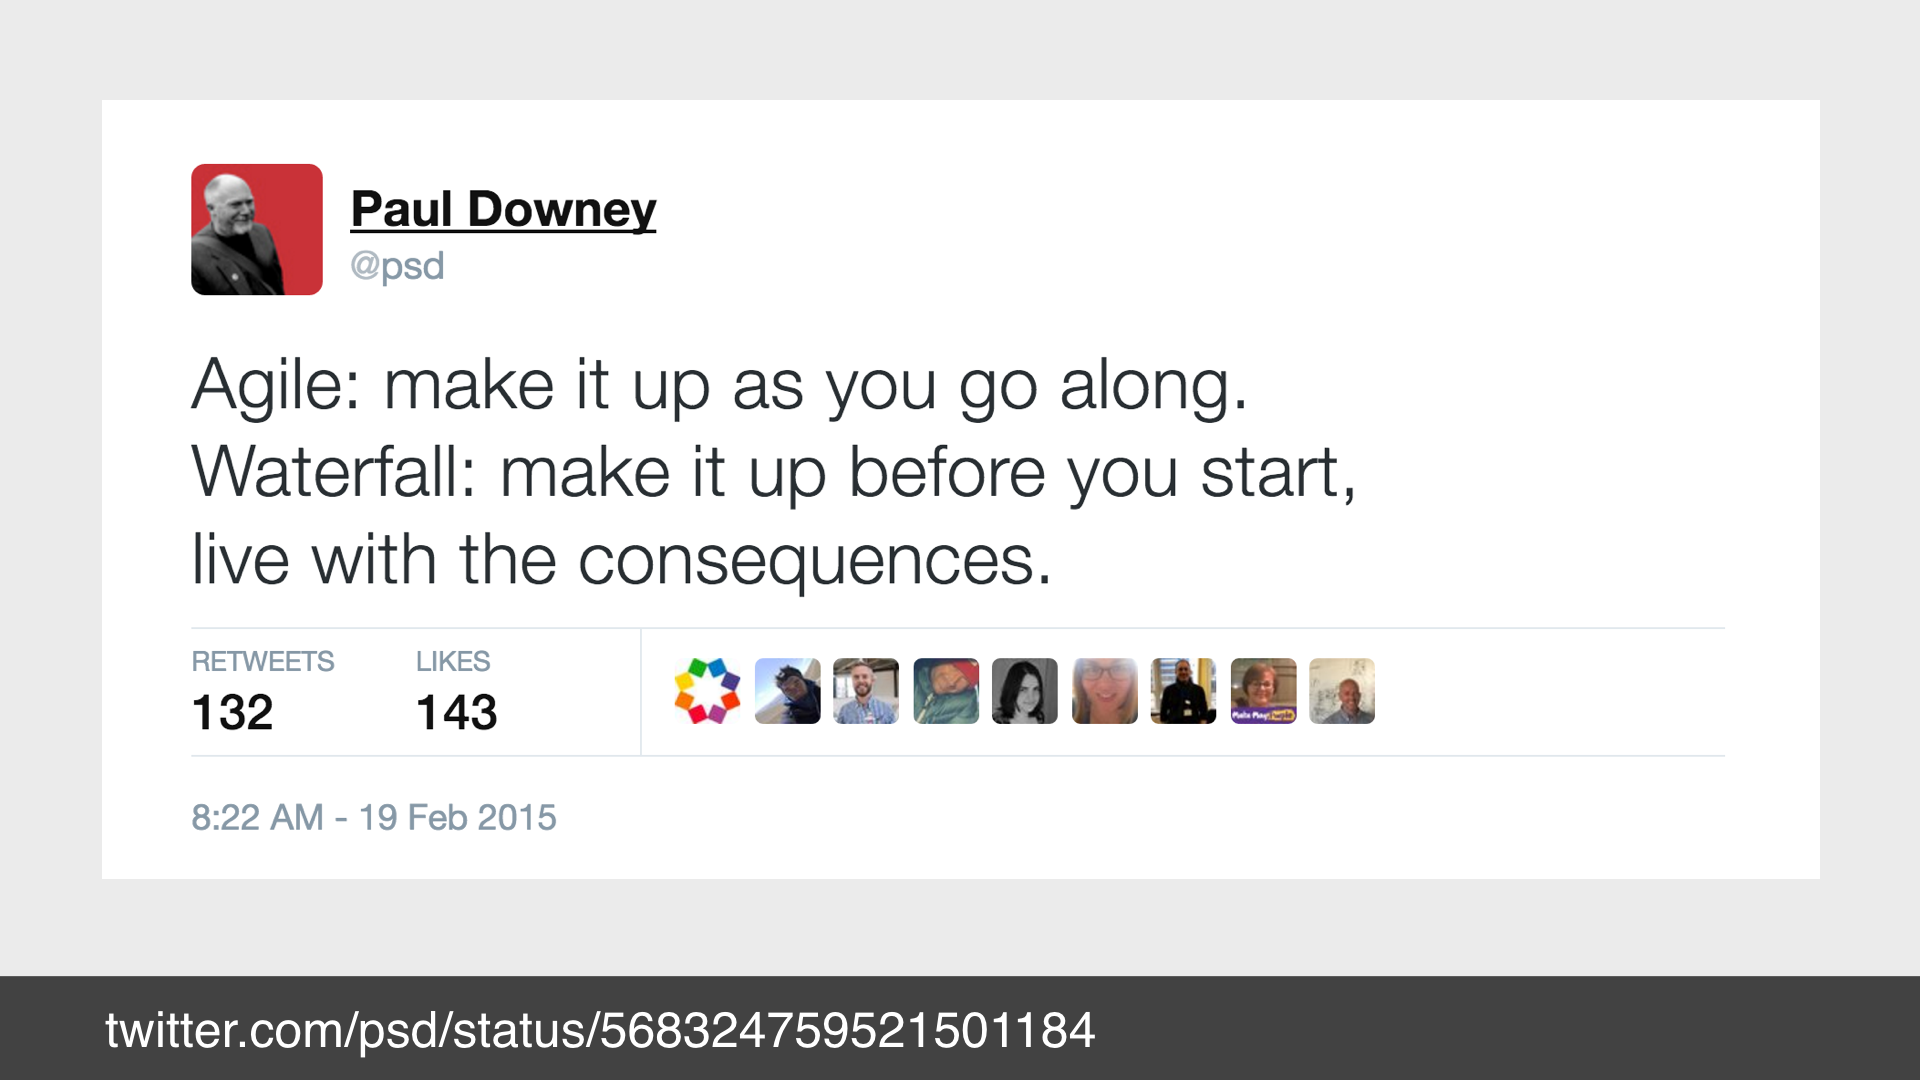 Tweet from @psd: "agile: make it up as you go along. Waterfall: make it up before you start, live with the consequences"